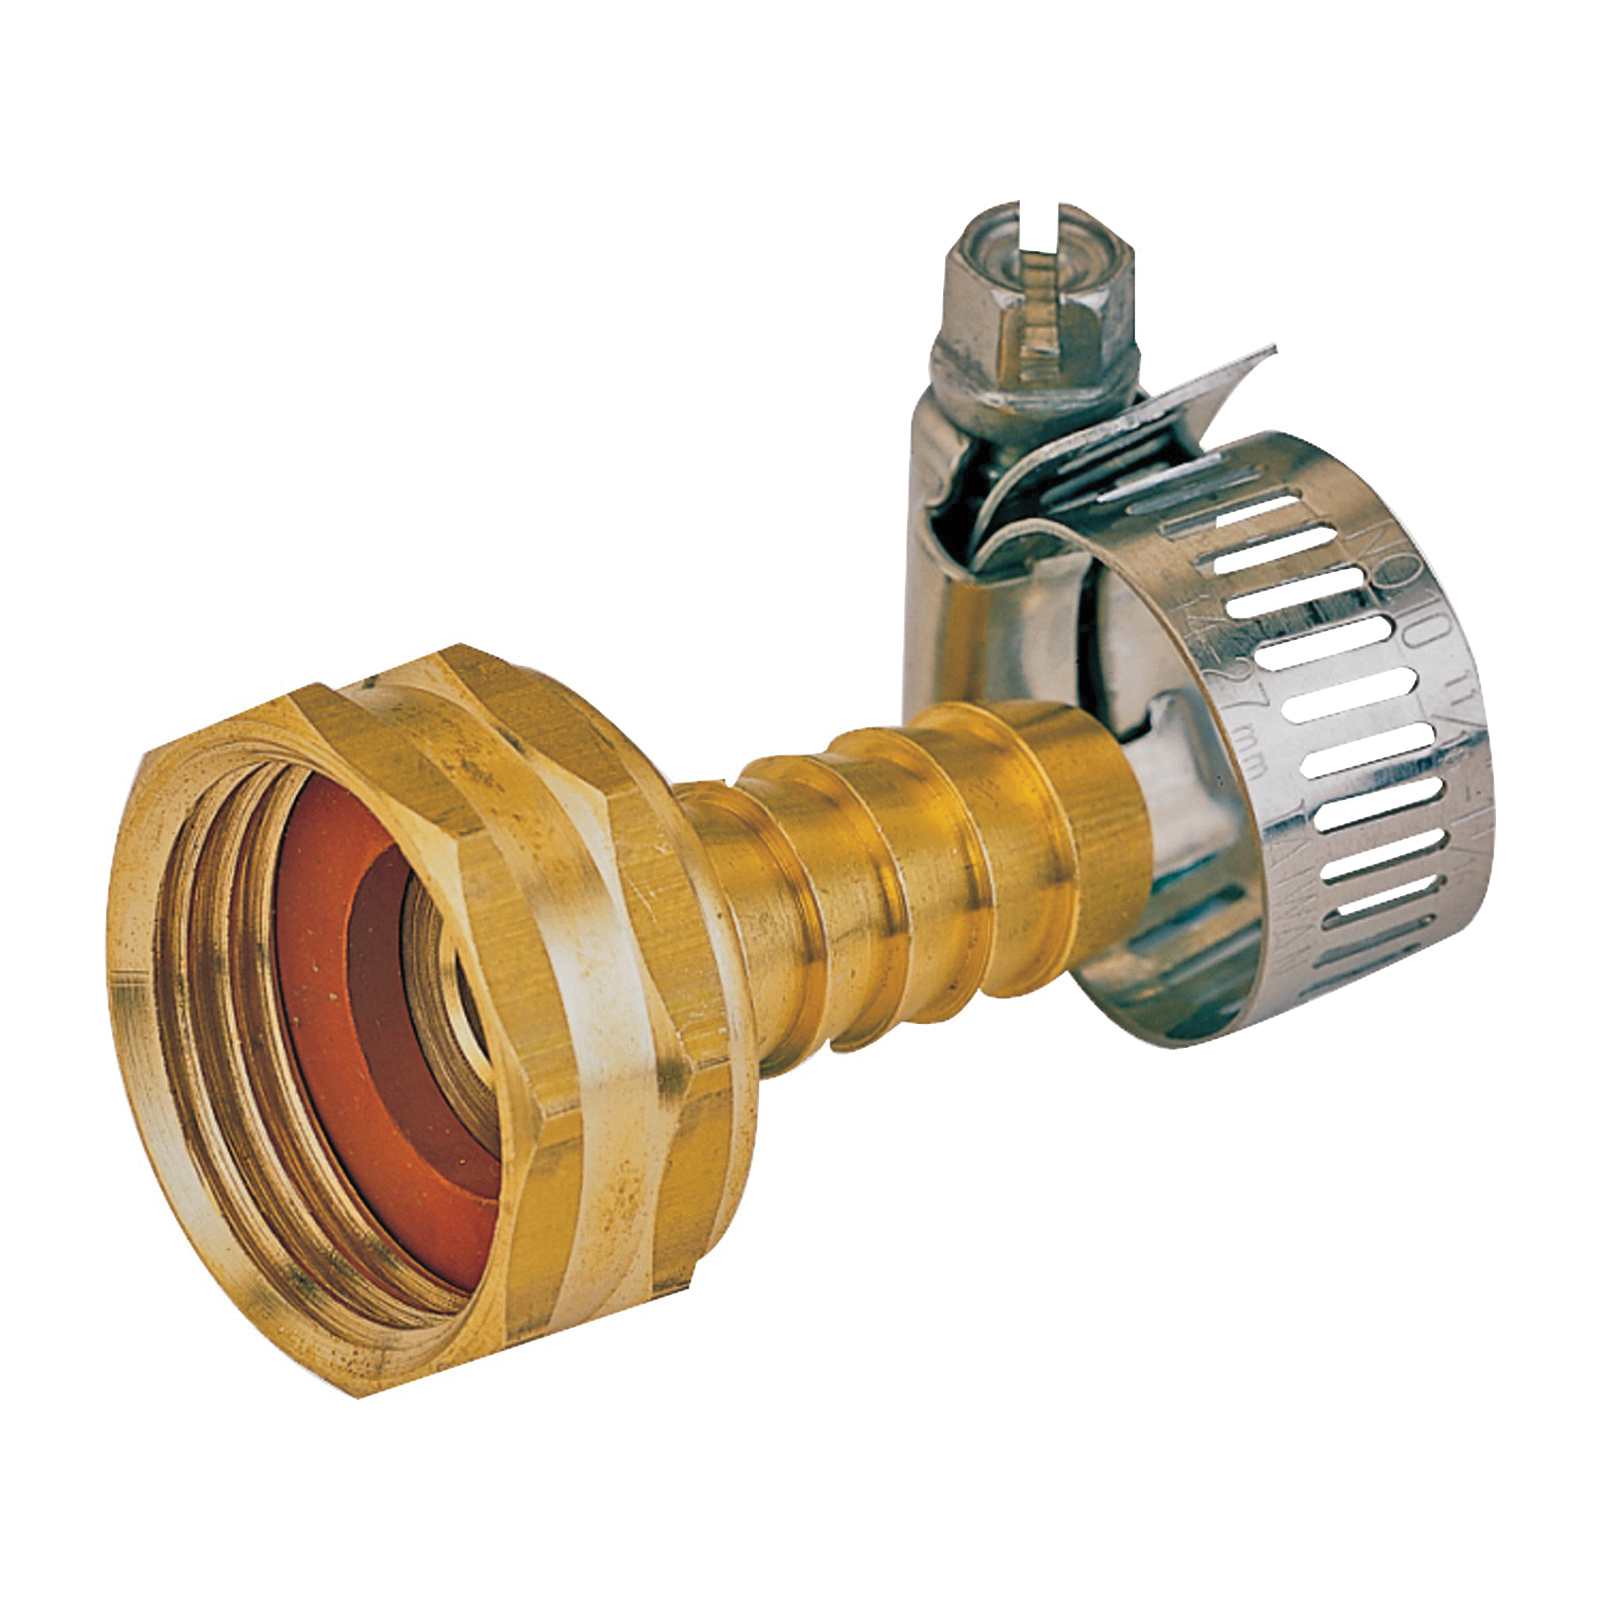 Landscapers Select GB934F3L Hose Coupling, 1/2 in, Female, Brass, Brass